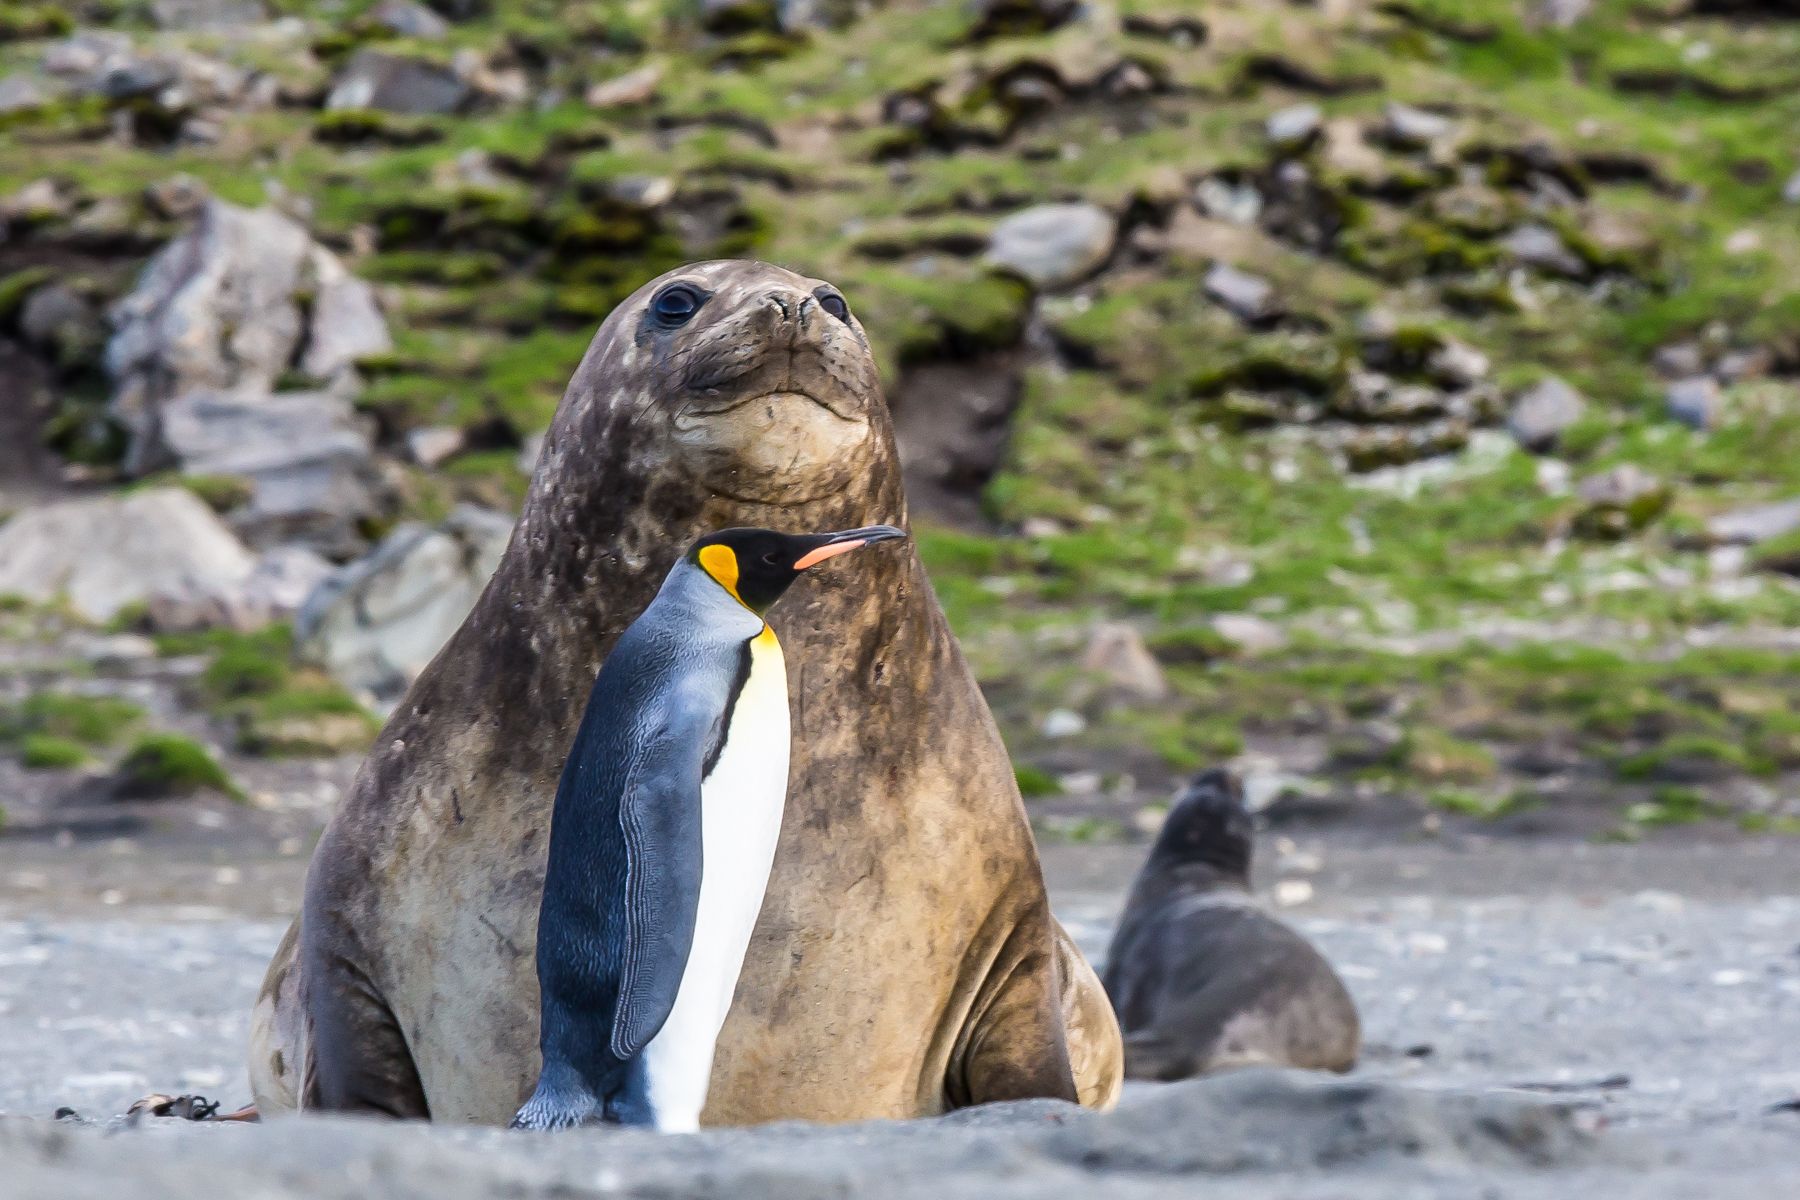 King Penguins are big penguins but even they appear small next to an adult female Southern Elephant Seal